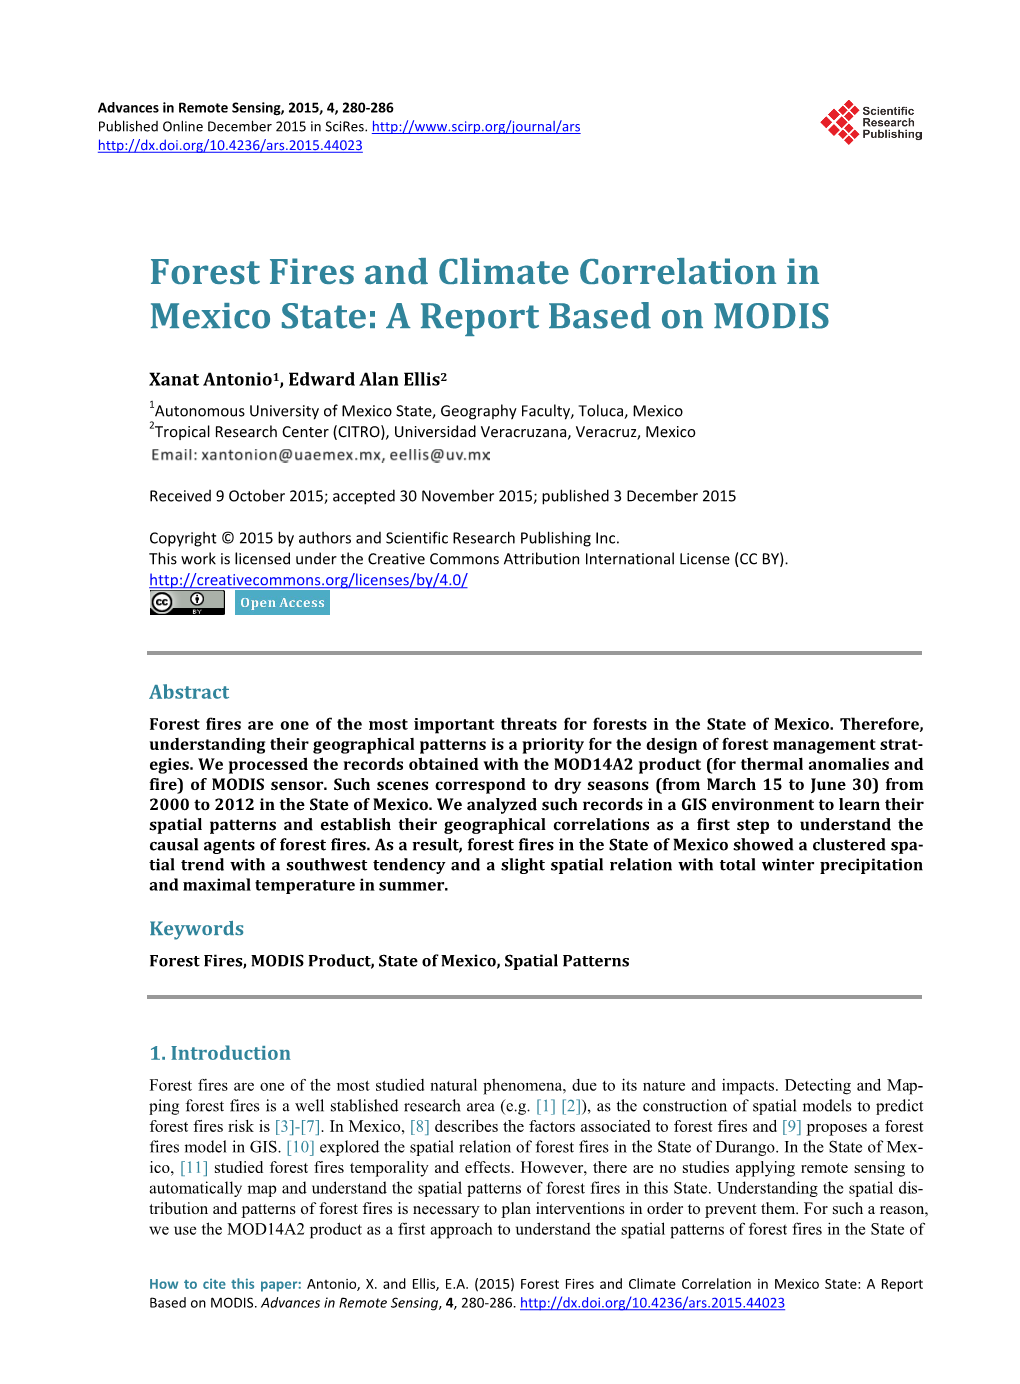 Forest Fires and Climate Correlation in Mexico State: a Report Based on MODIS